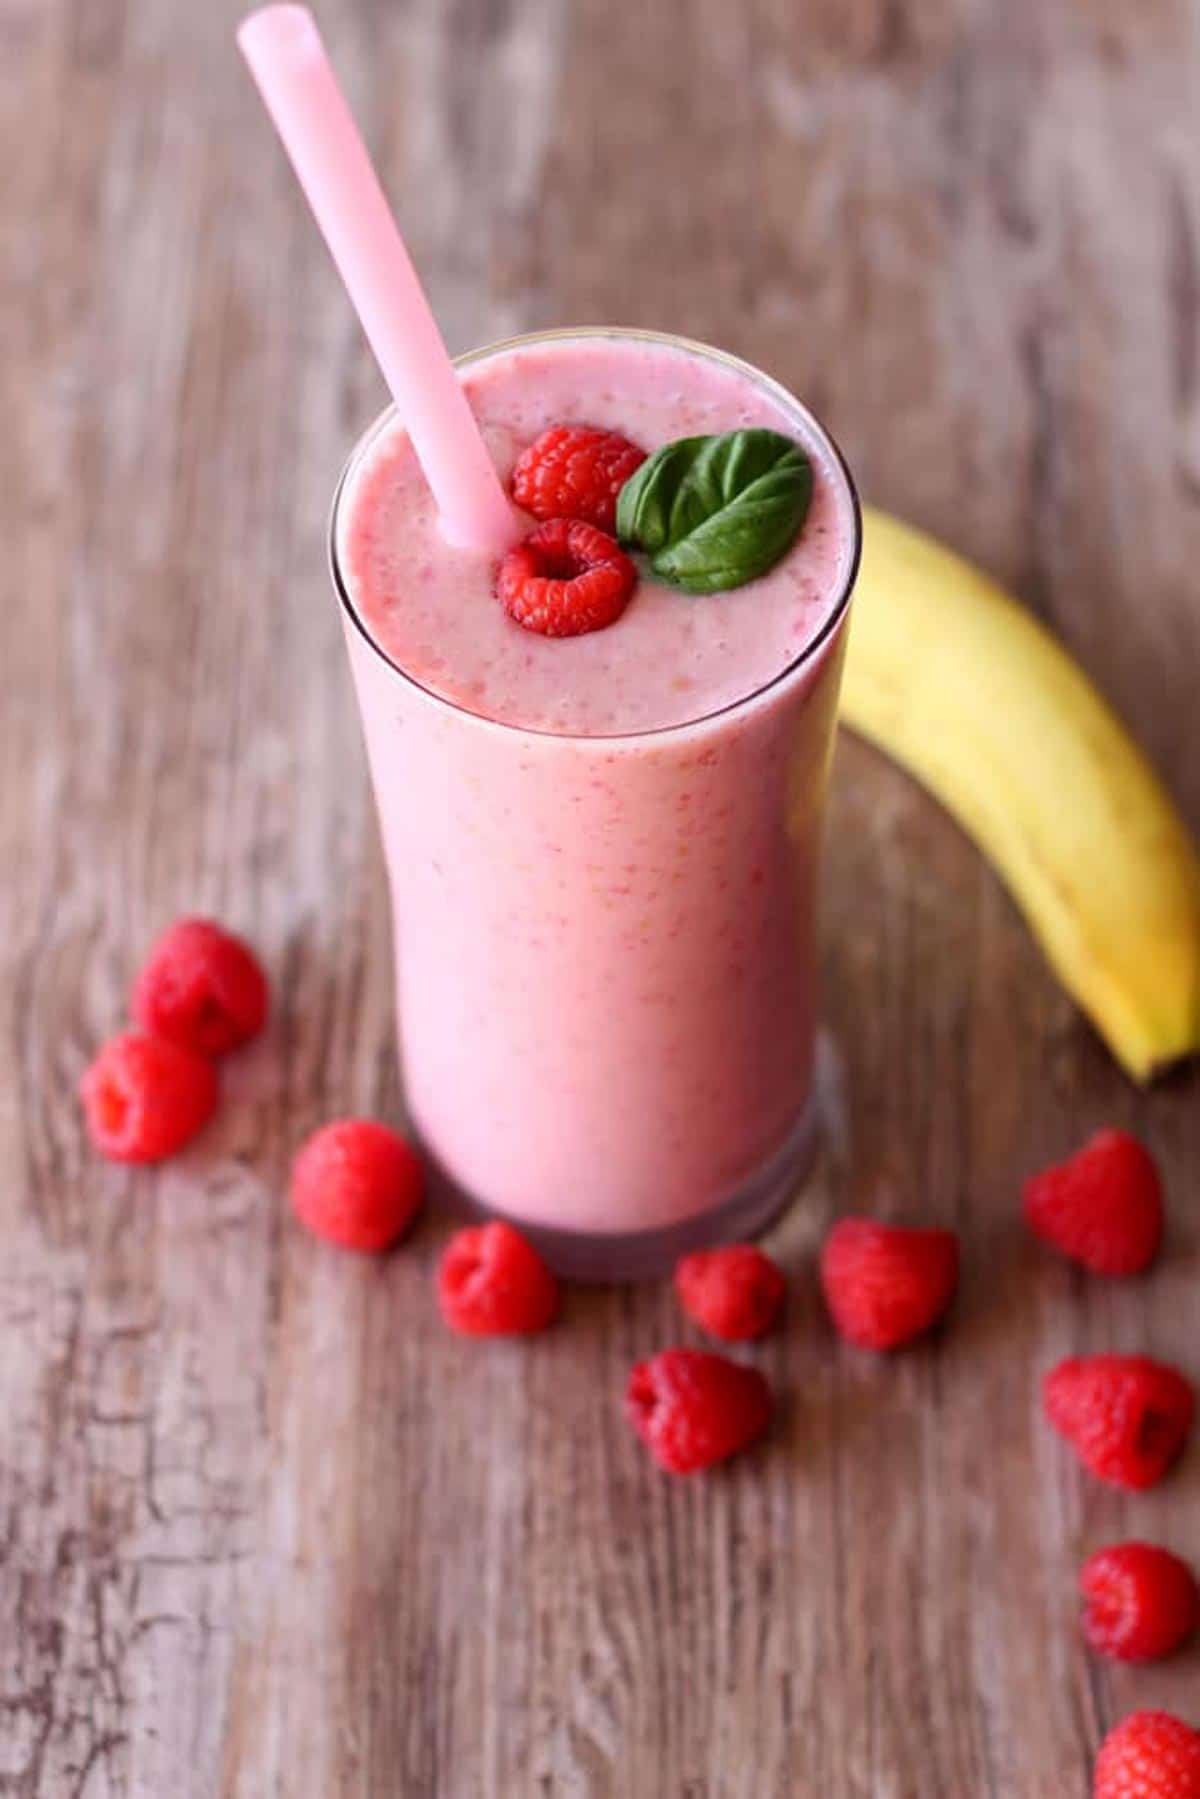 Raspberry Banana Layered Smoothie - Del's cooking twist